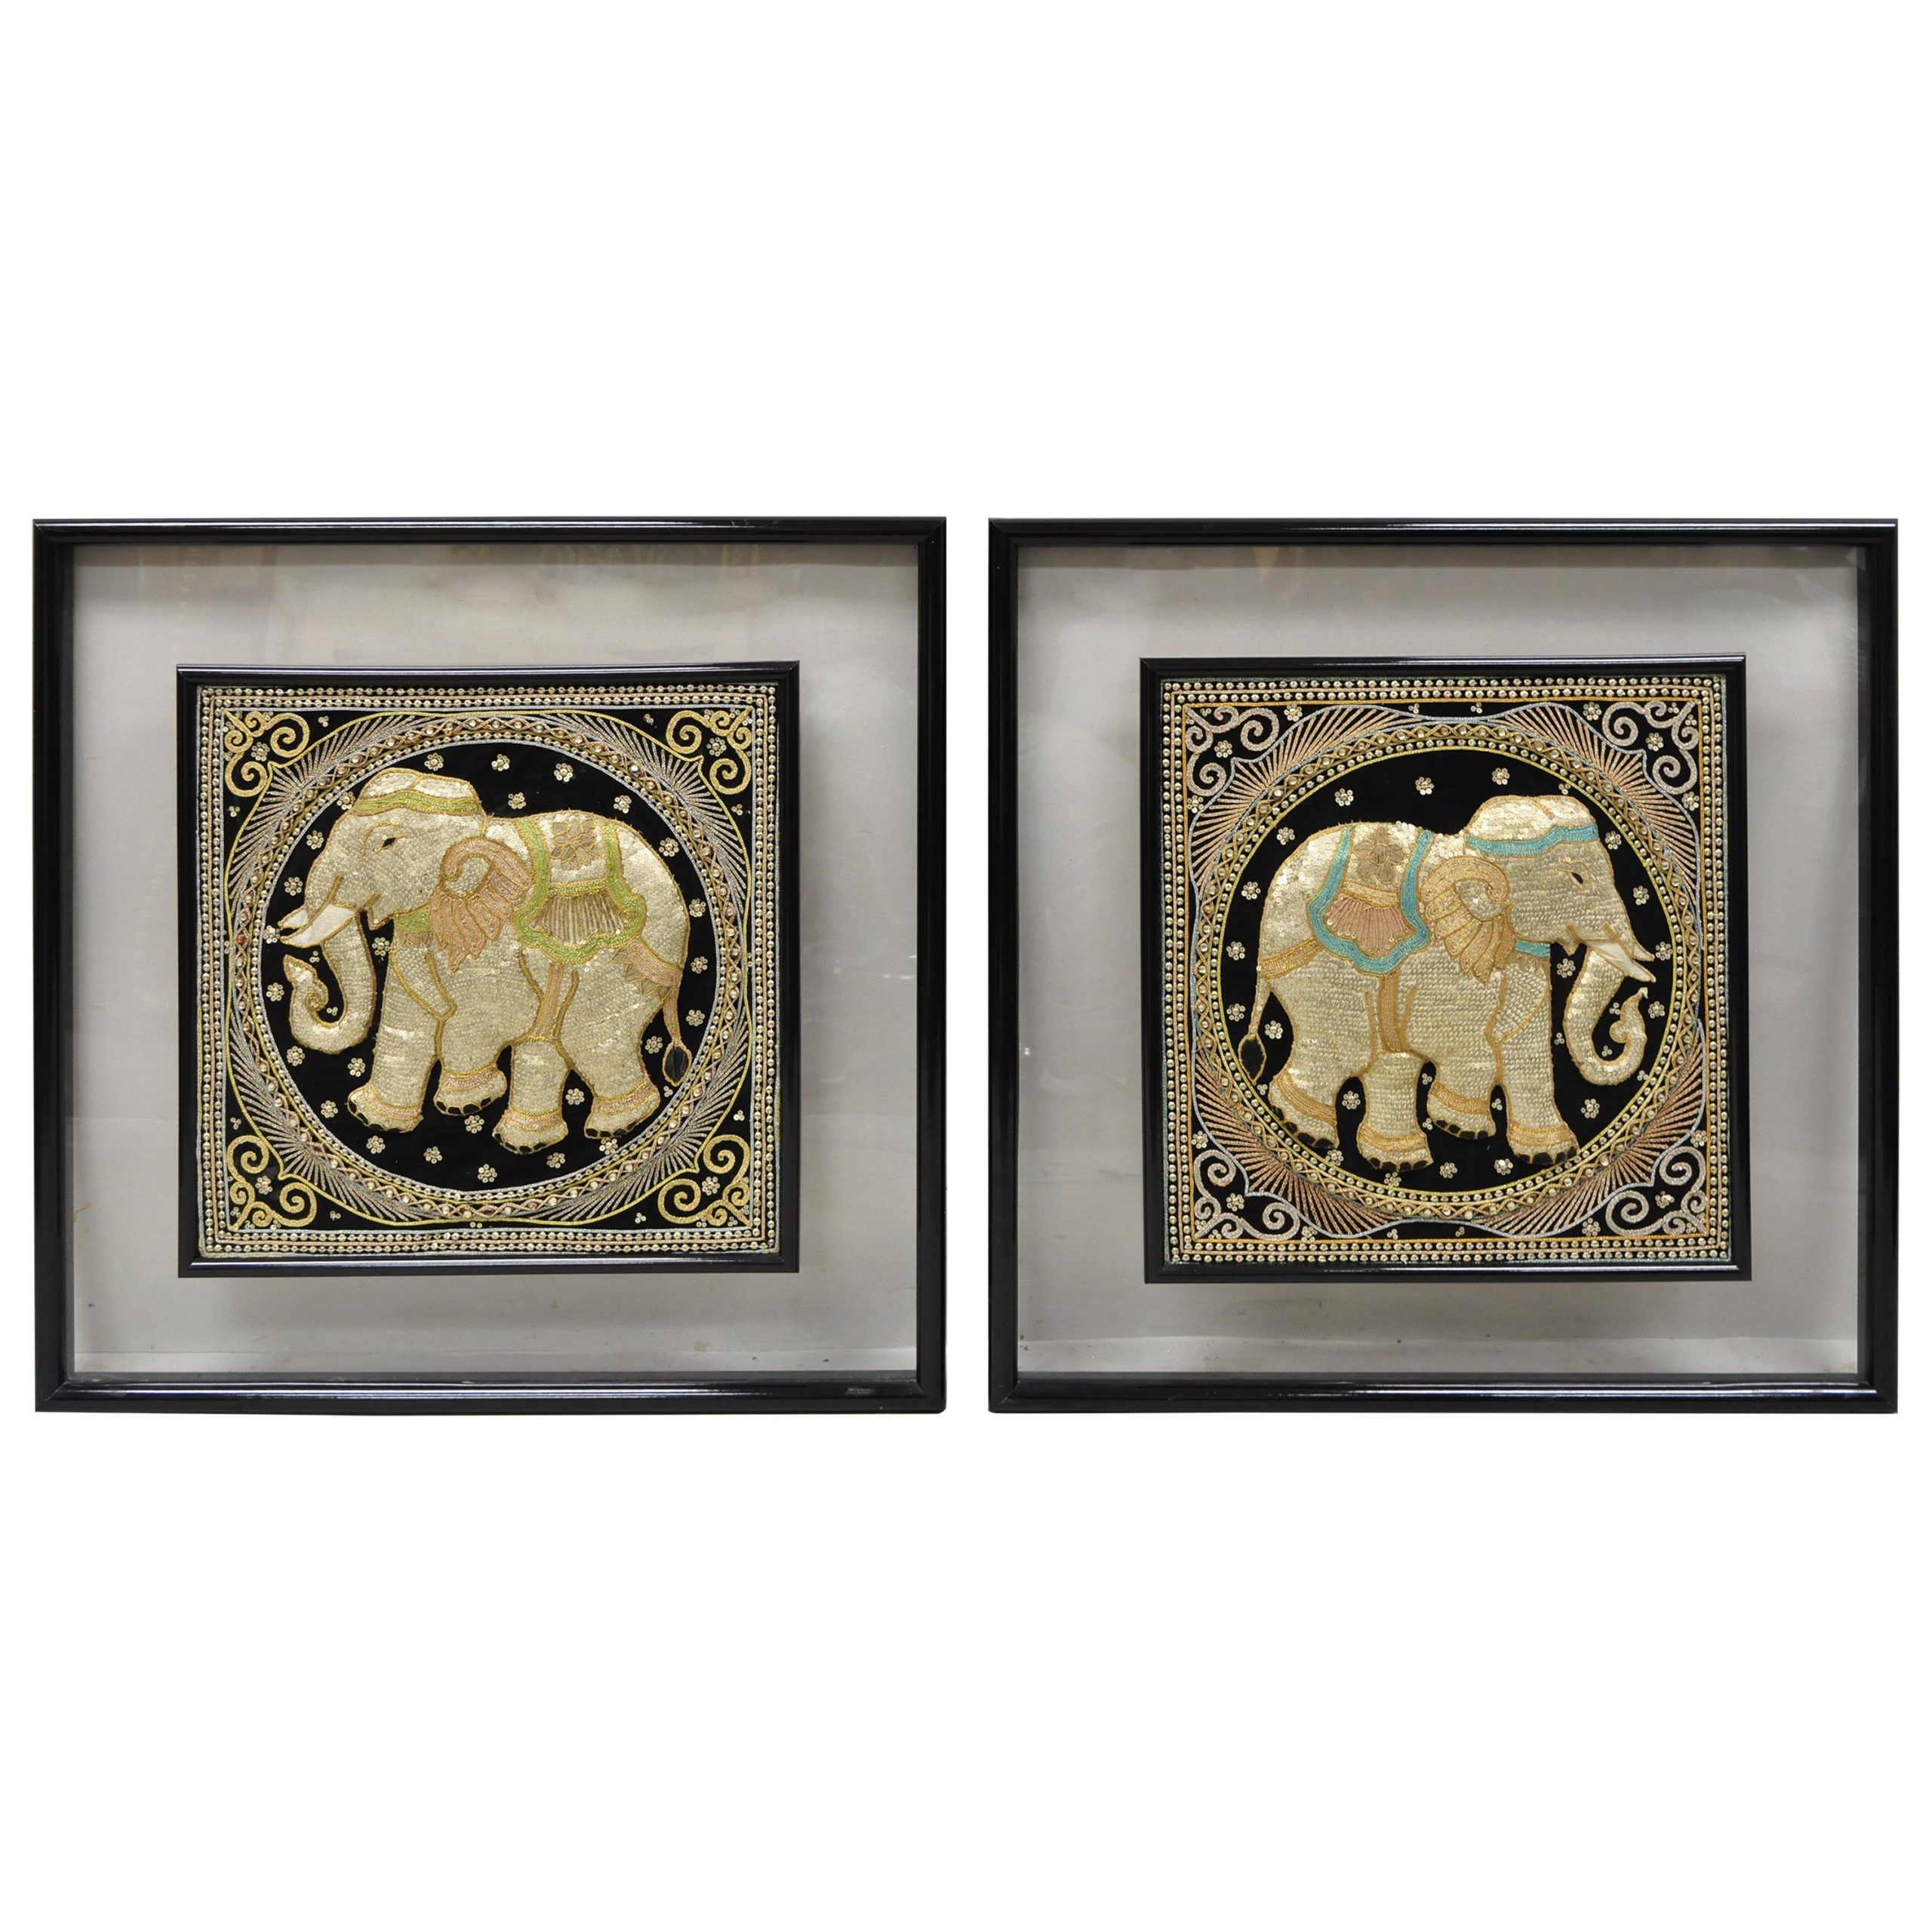 Framed Beaded Embroidered Elephant Padded Tapestry Indian Wall Art, A Pair  For Sale At 1stdibs Inside Most Current Indian Wall Art (View 18 of 20)